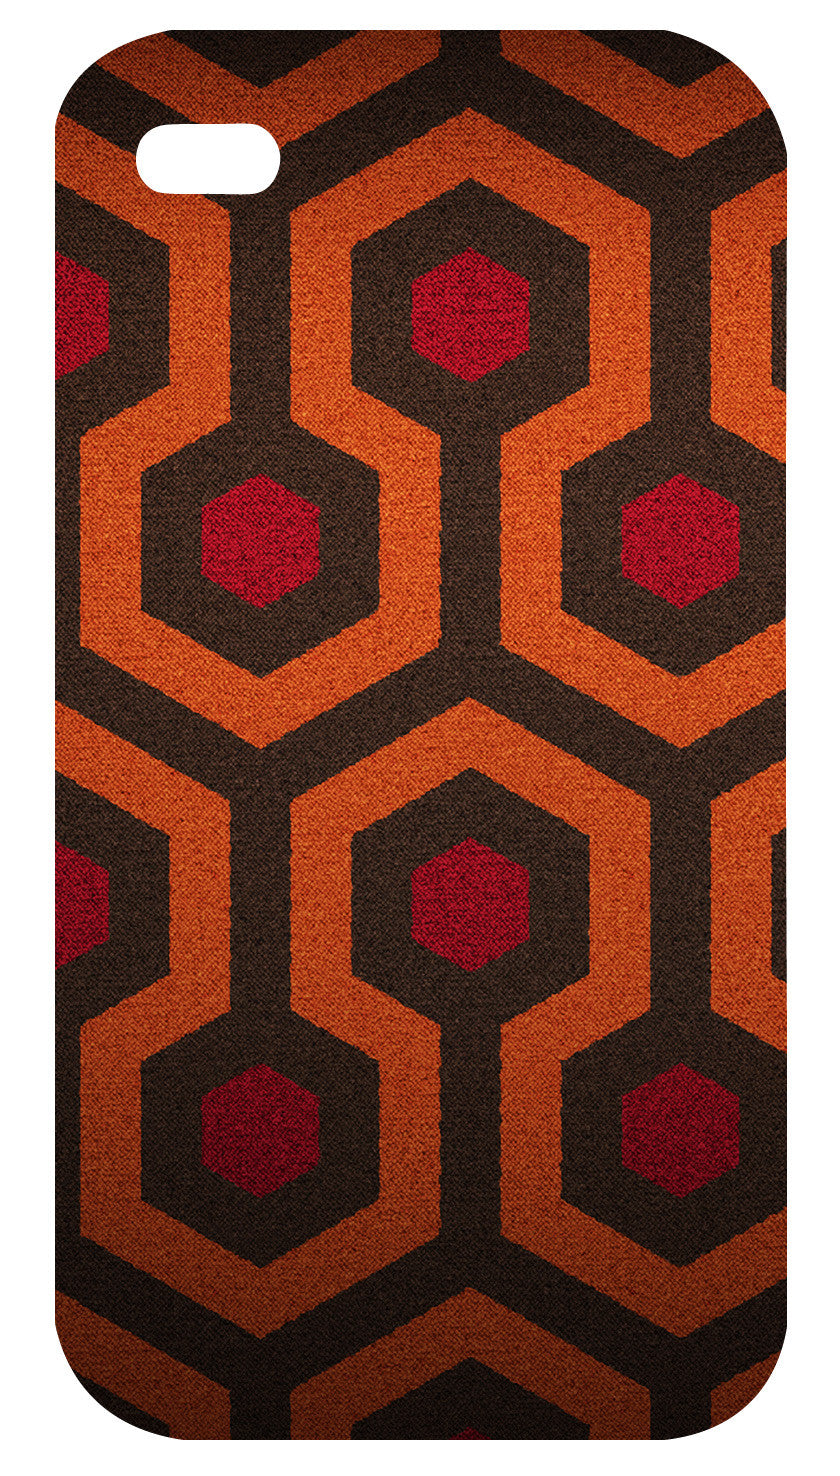 The Shining Overlook Hotel iPhone 4/4S Case